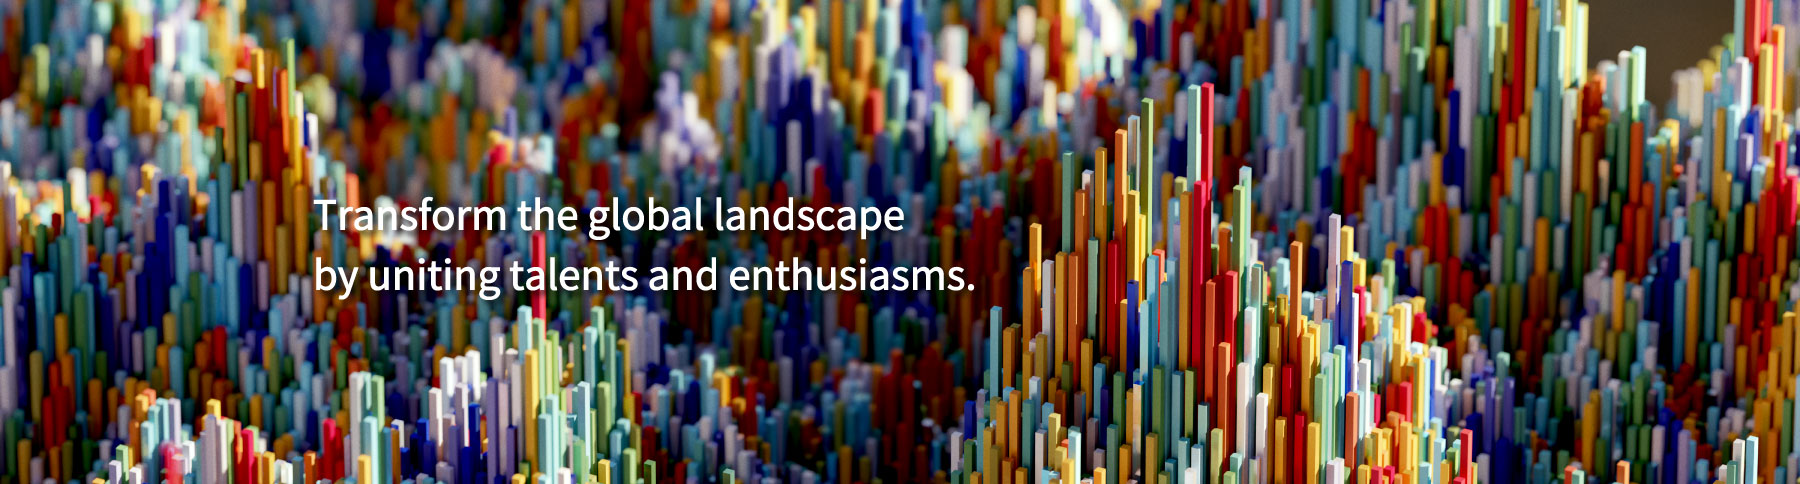 Transform the global landscape by uniting talents and enthusiasms.